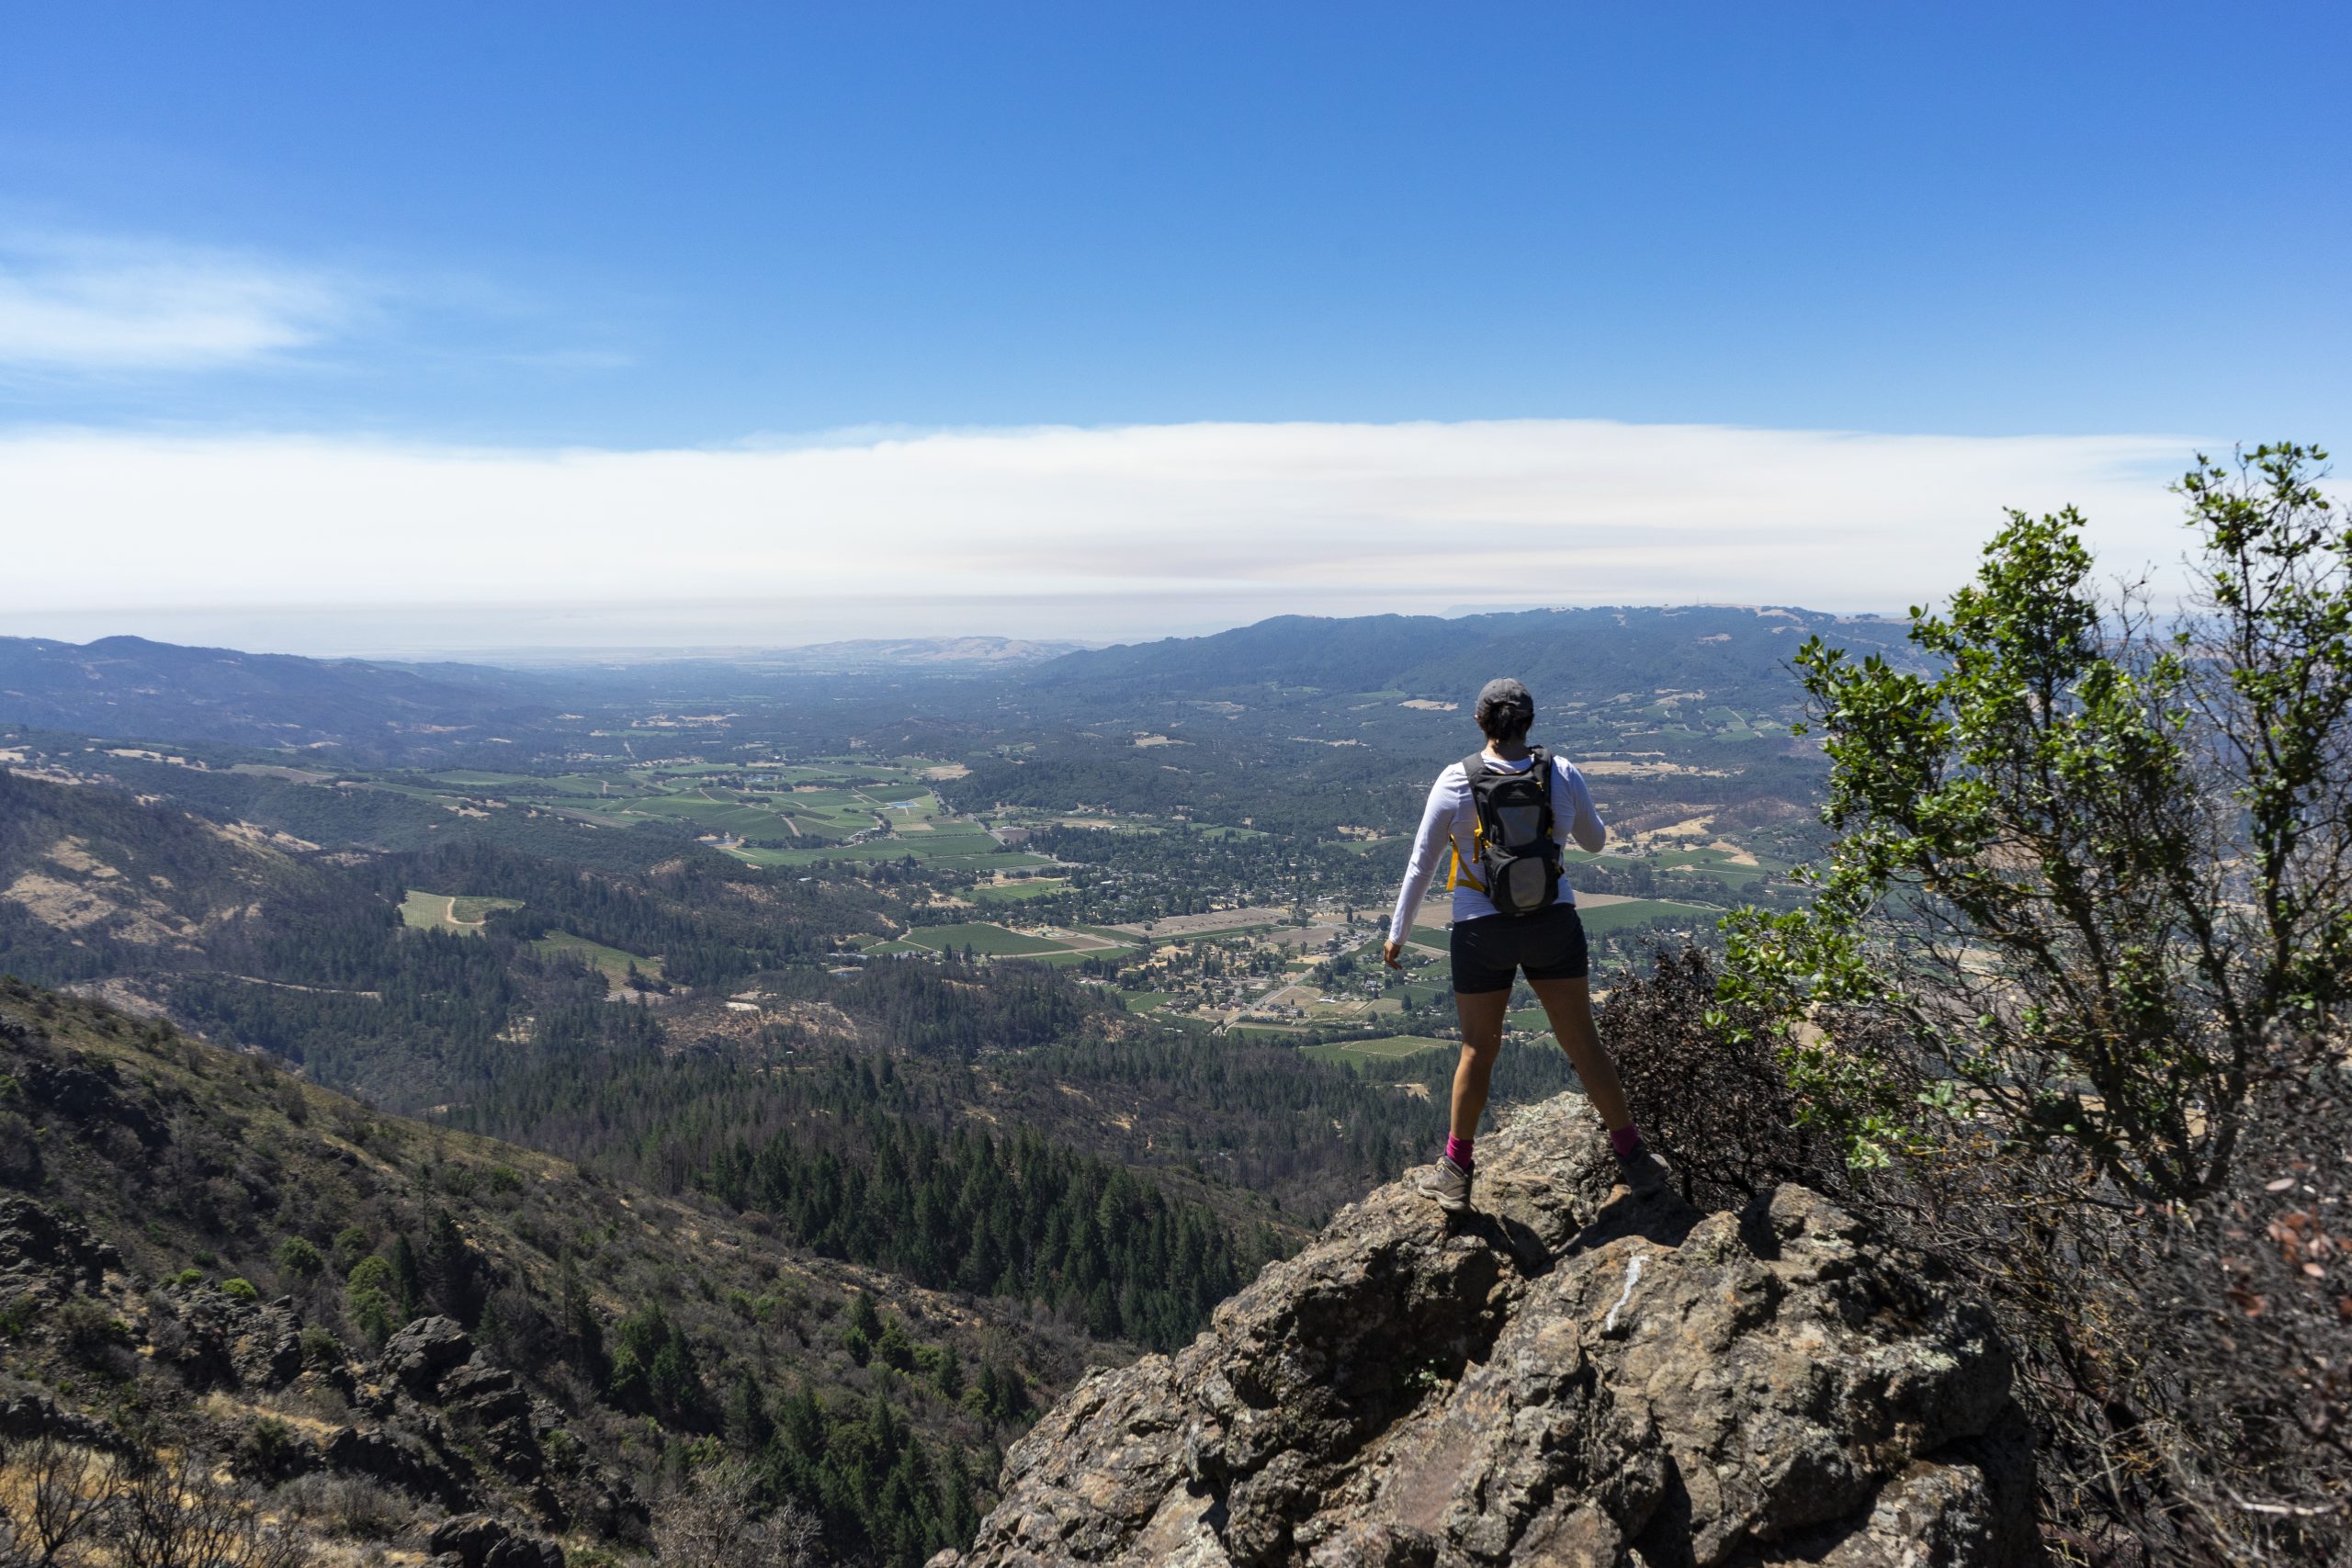 Hiker on mountain top overlooking a view of Sonoma Valley